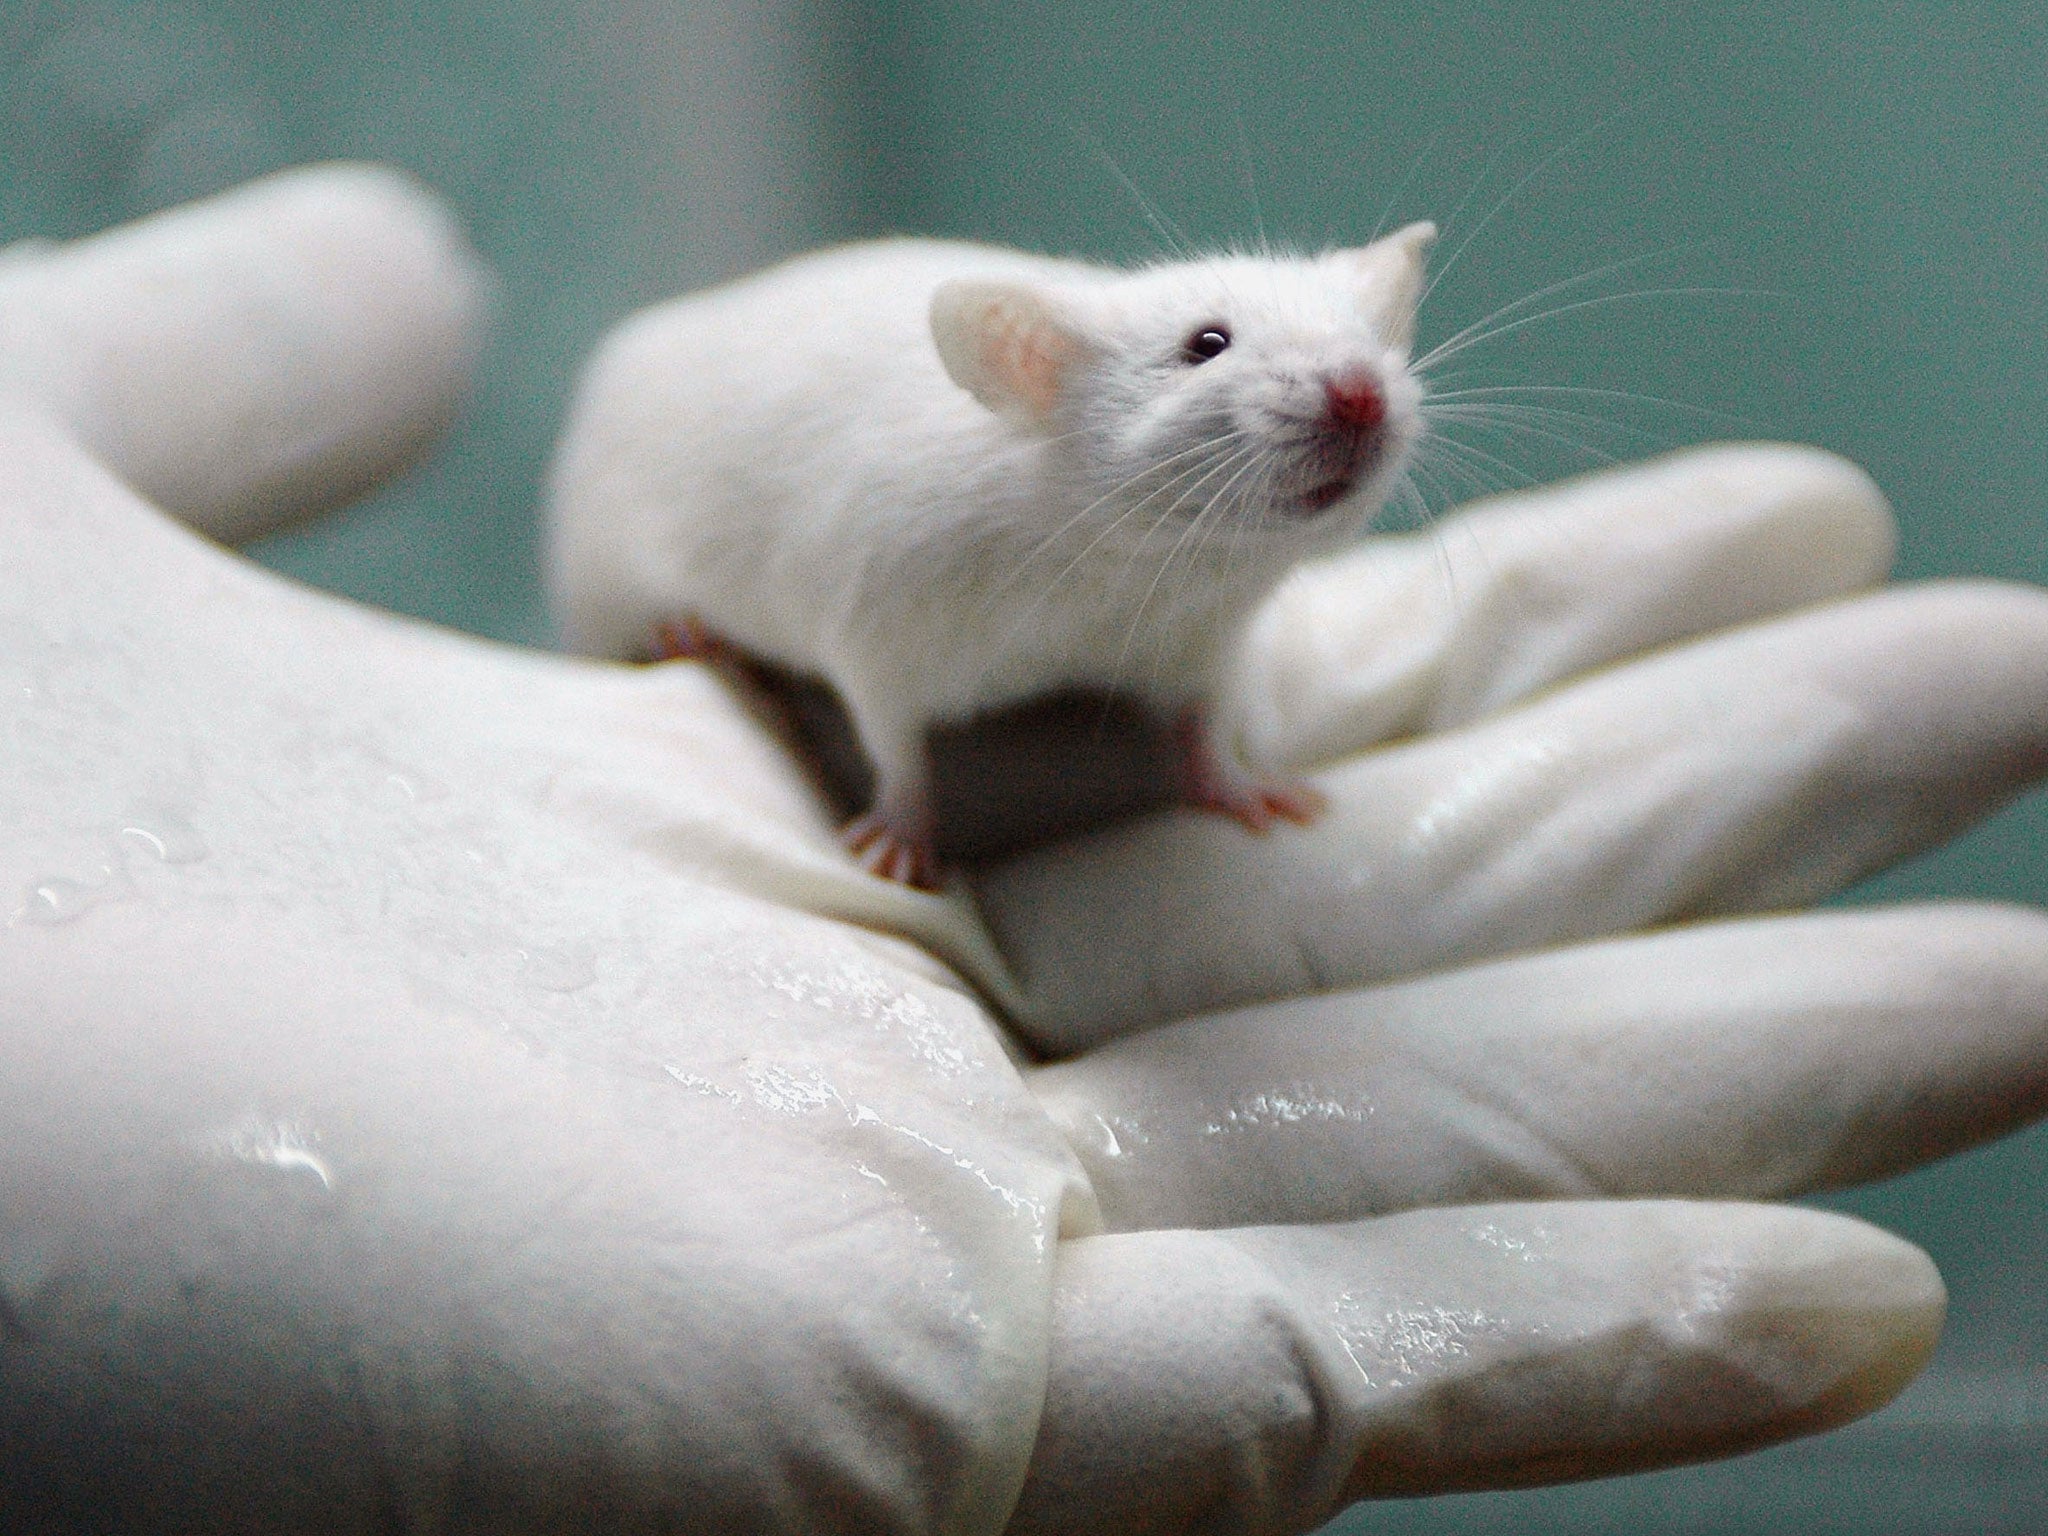 Scientists say they have observed brain activity in dying rats that may shed light on the mystery of human near death experiences